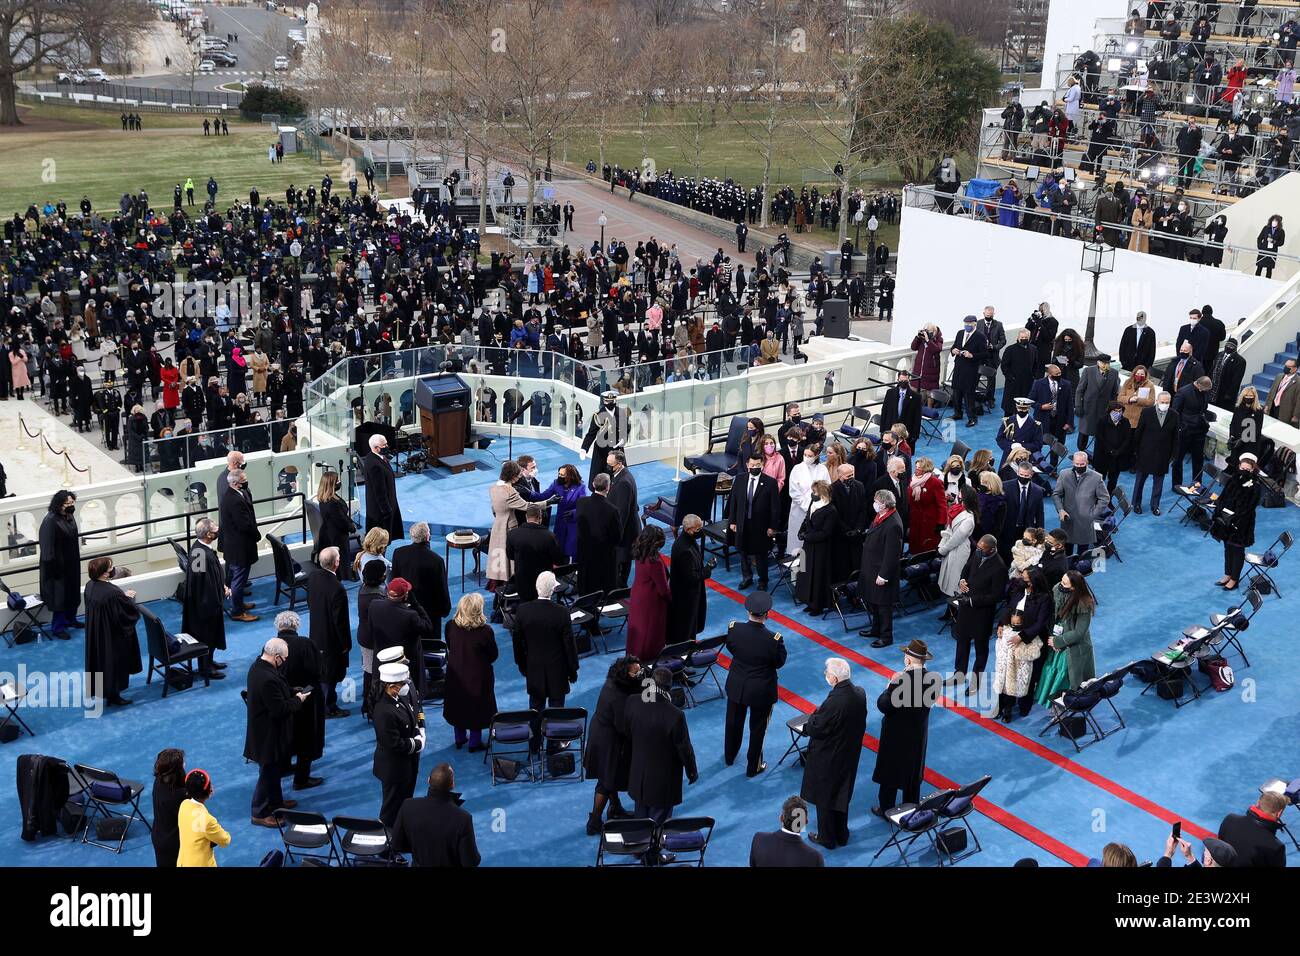 Washington, DC, USA. 20th Jan, 2021. Guests attend the inauguration of U.S. President-elect Joe Biden on the West Front of the U.S. Capitol on January 20, 2021 in Washington, DC. During today's inauguration ceremony Joe Biden becomes the 46th president of the United States. ( Credit: Tasos Katopodis/Getty Images)/Media Punch/Alamy Live News Stock Photo